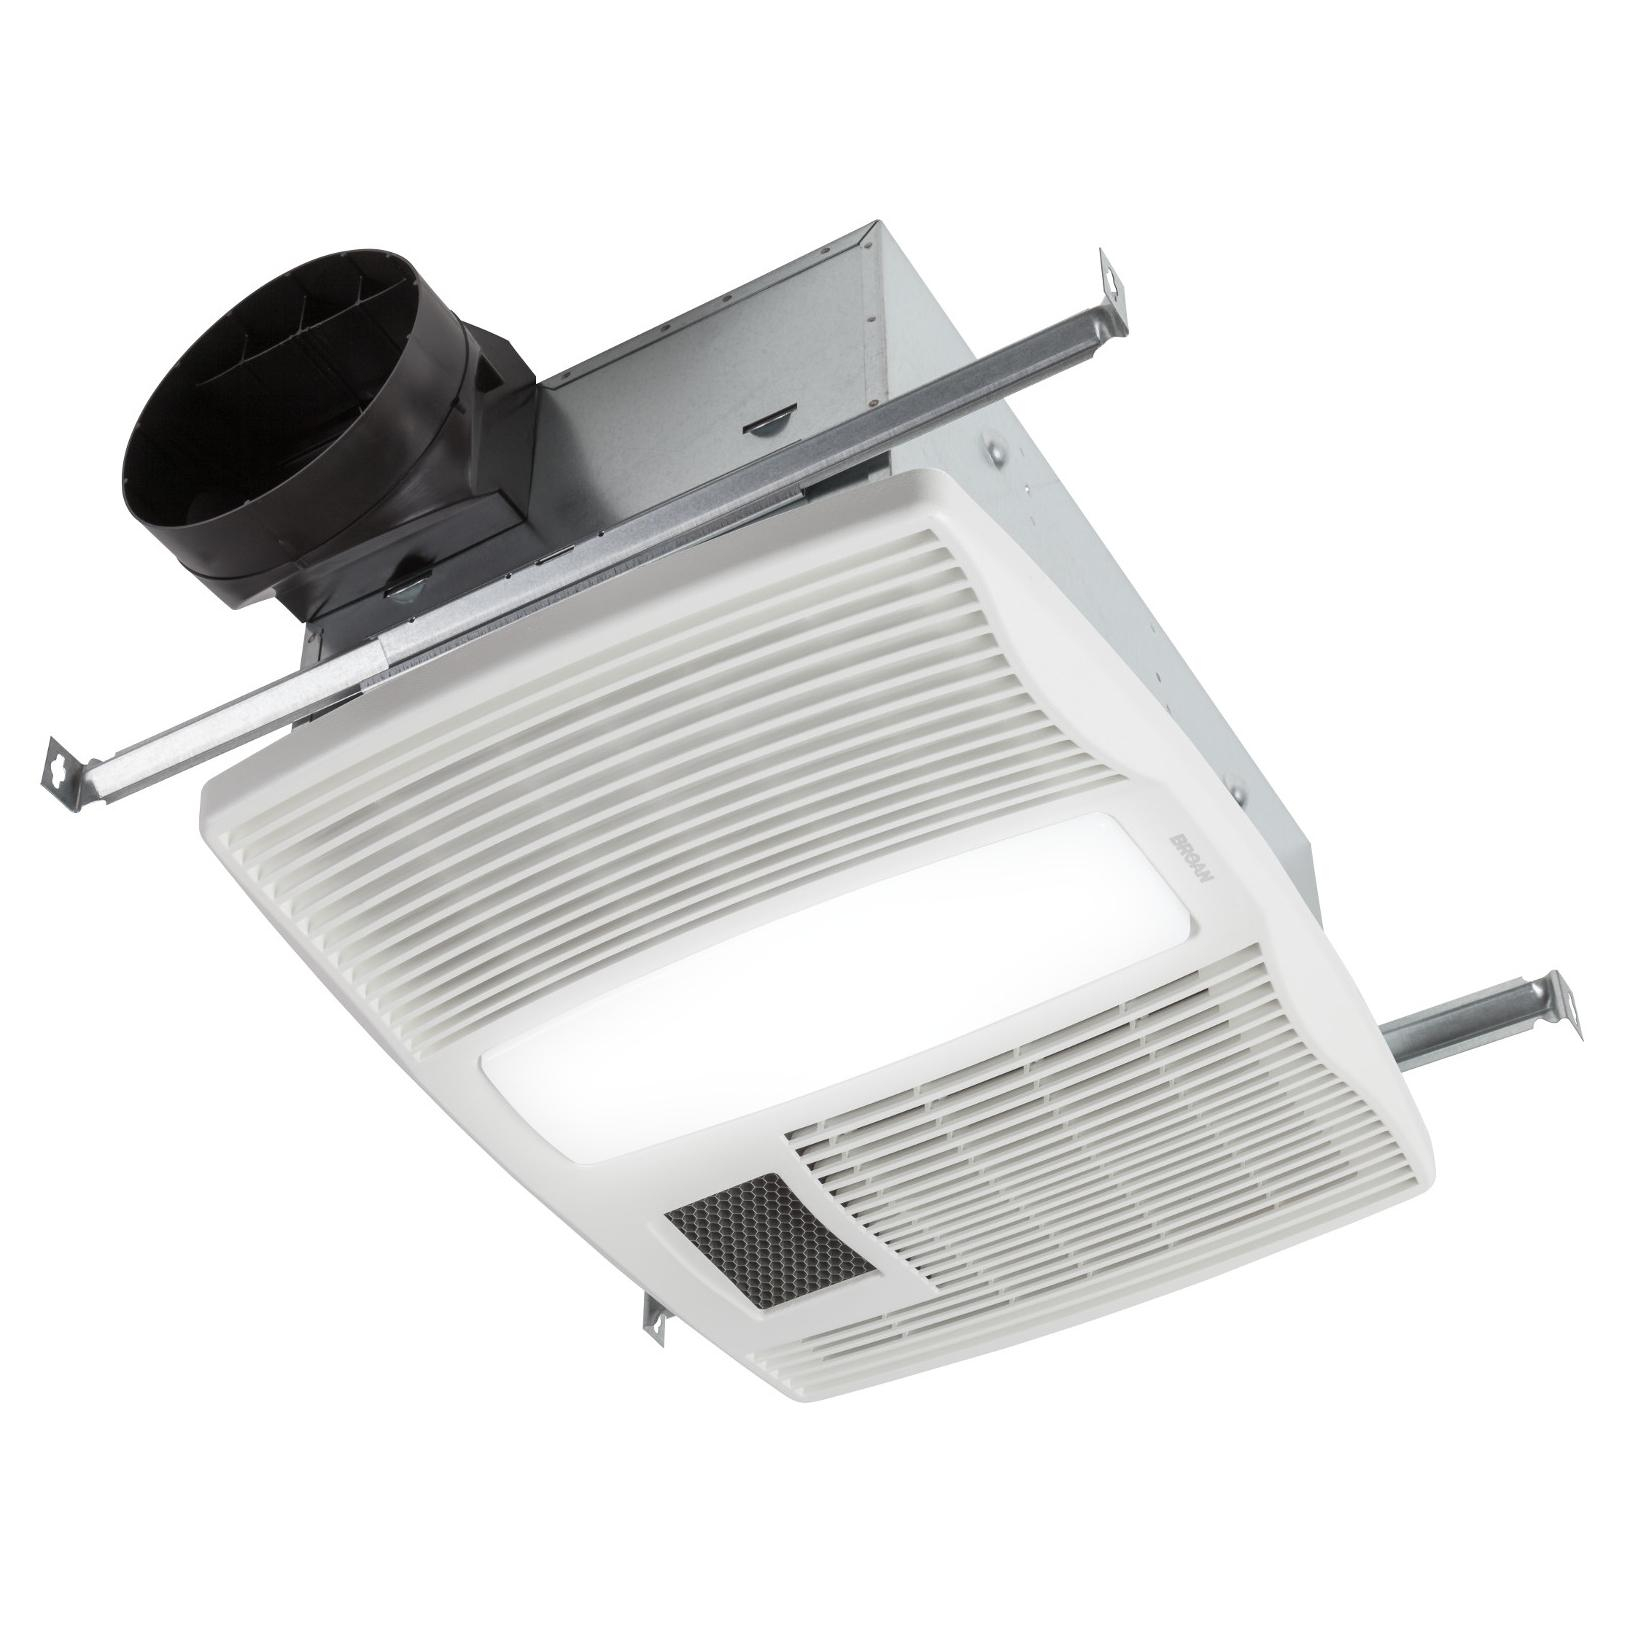 Incredible Bathroom Exhaust Fan With Light And Heater in dimensions 1626 X 1626